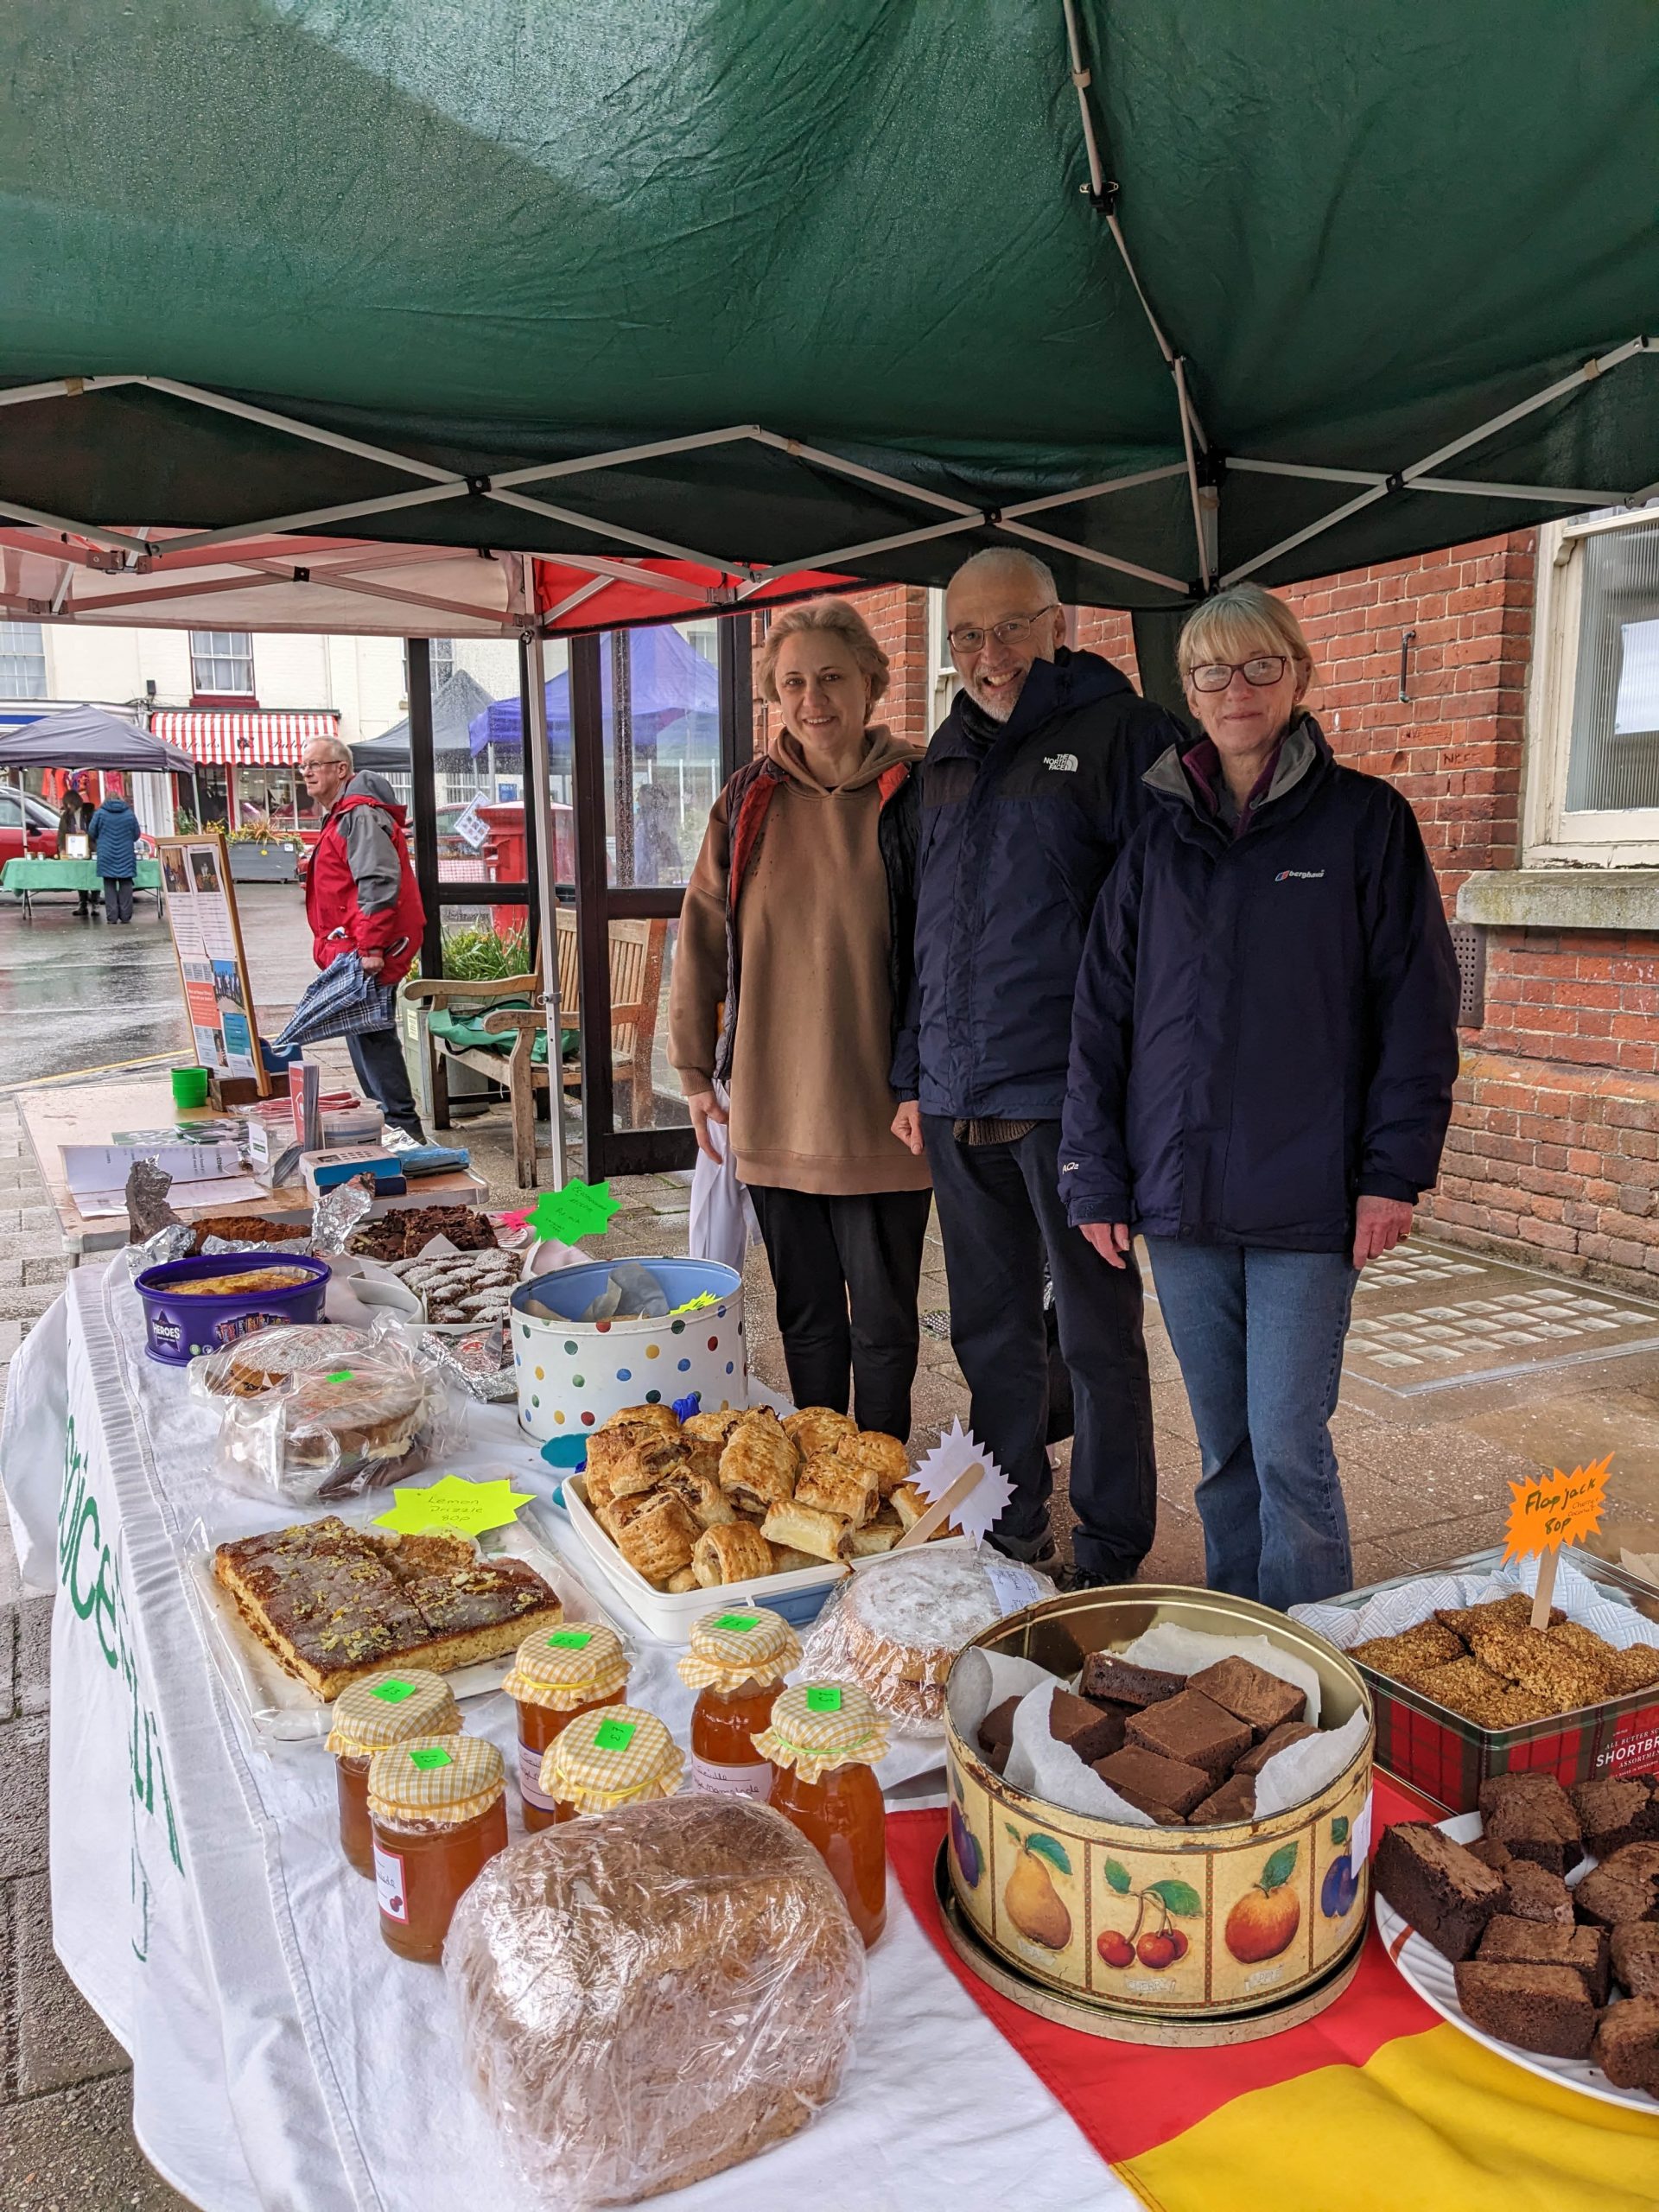 Aylsham market place to host a ‘Cake Stall of Delights’ for charity